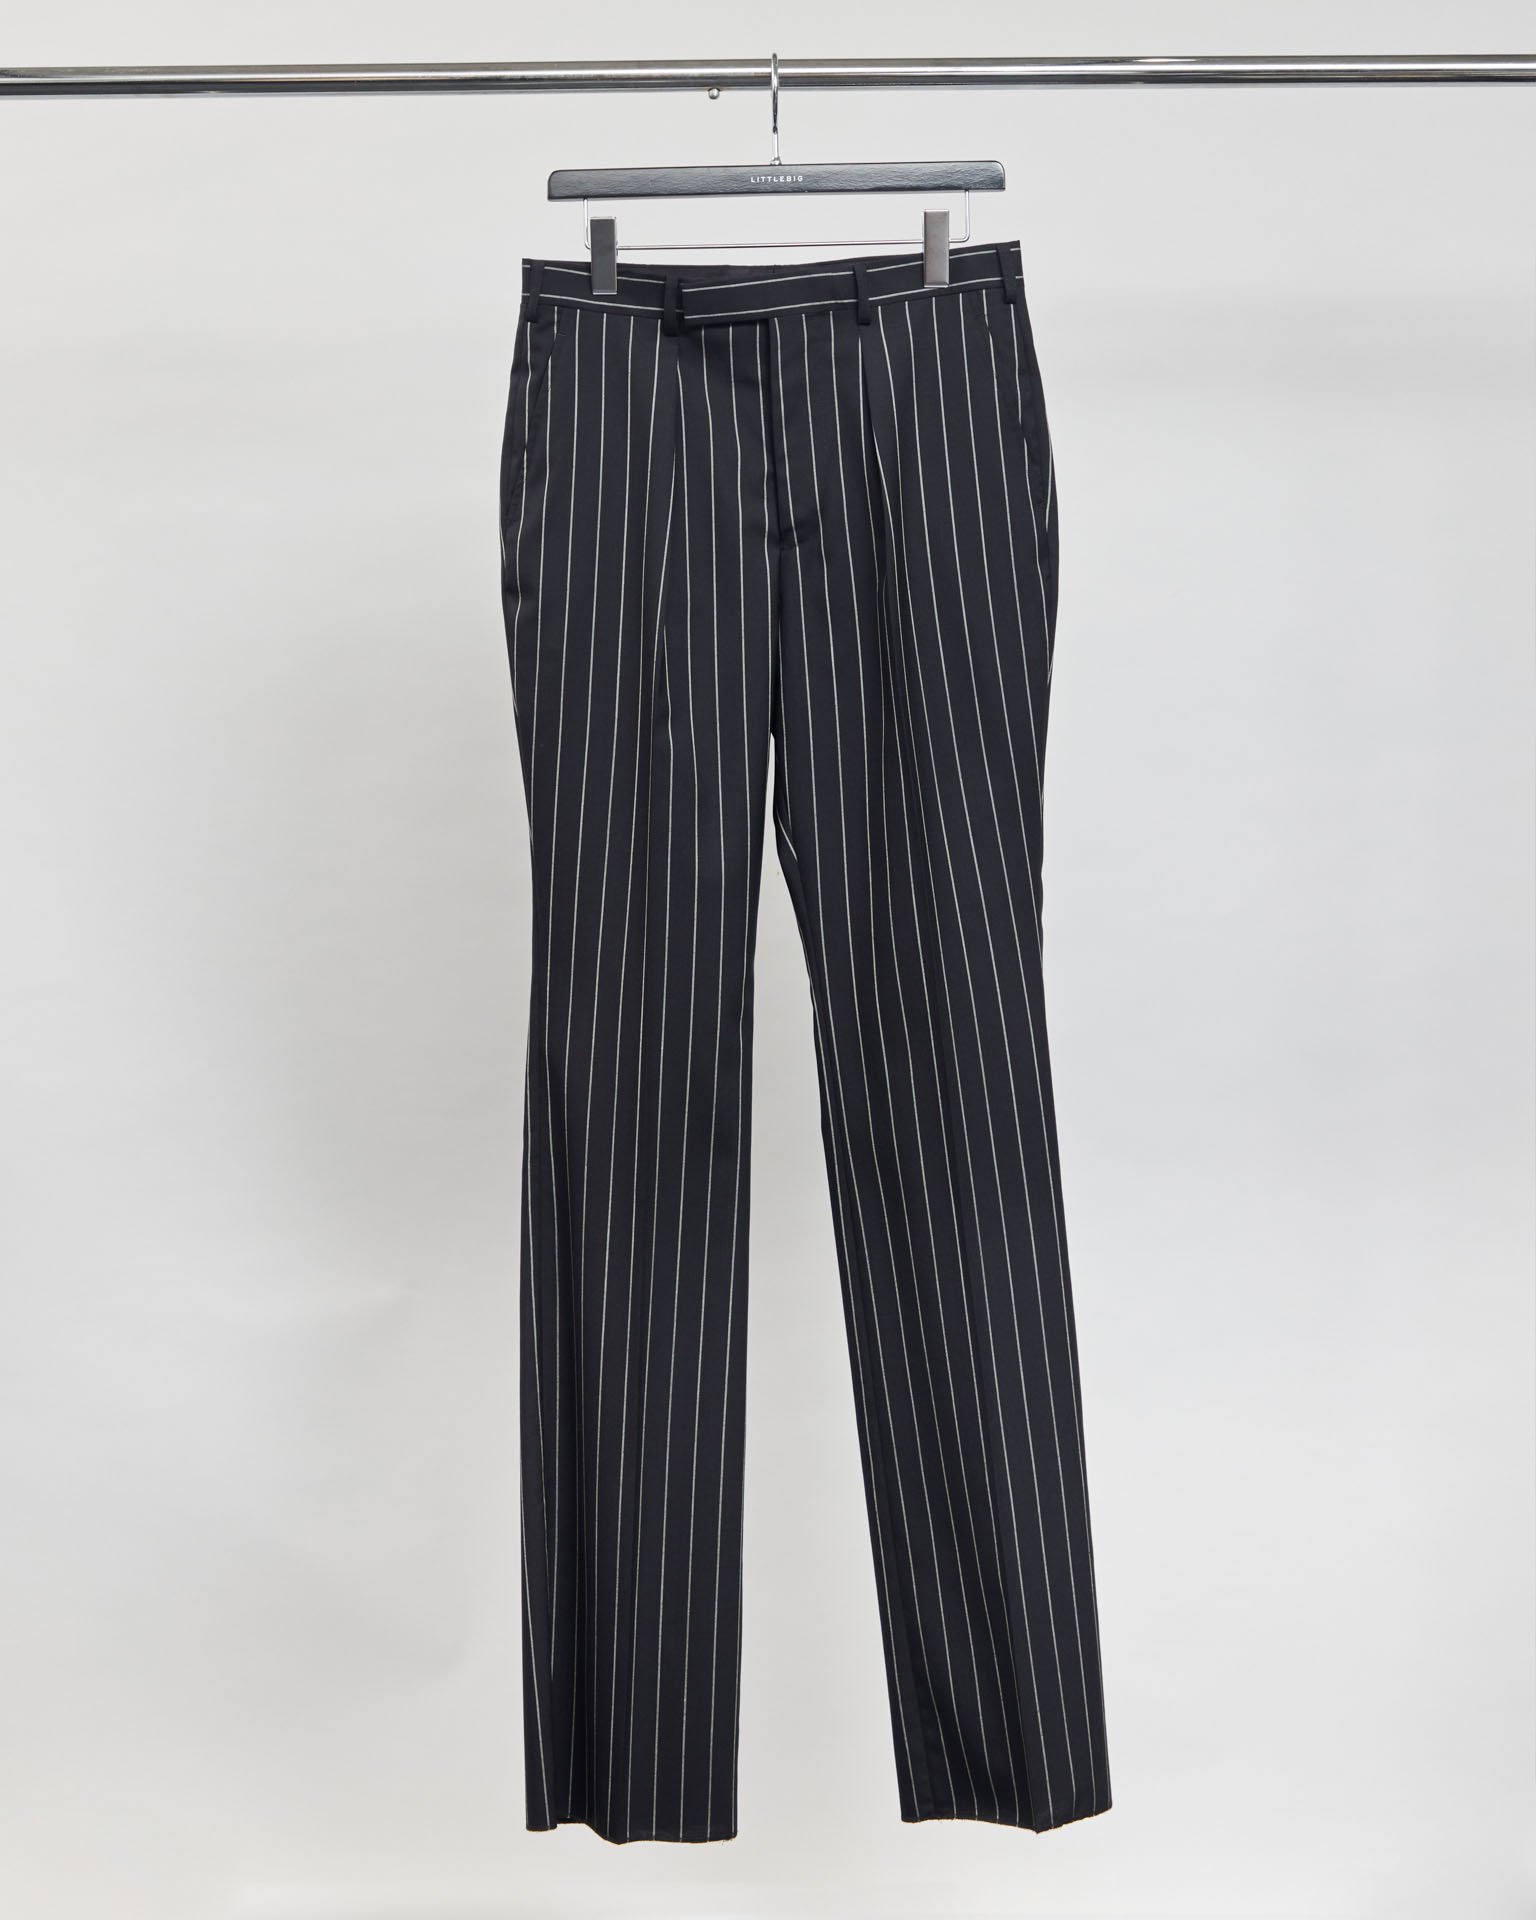 LITTLEBIG<br />Stripe Jacket & Stripr Flare Trousers SET / Black<img class='new_mark_img2' src='https://img.shop-pro.jp/img/new/icons47.gif' style='border:none;display:inline;margin:0px;padding:0px;width:auto;' />